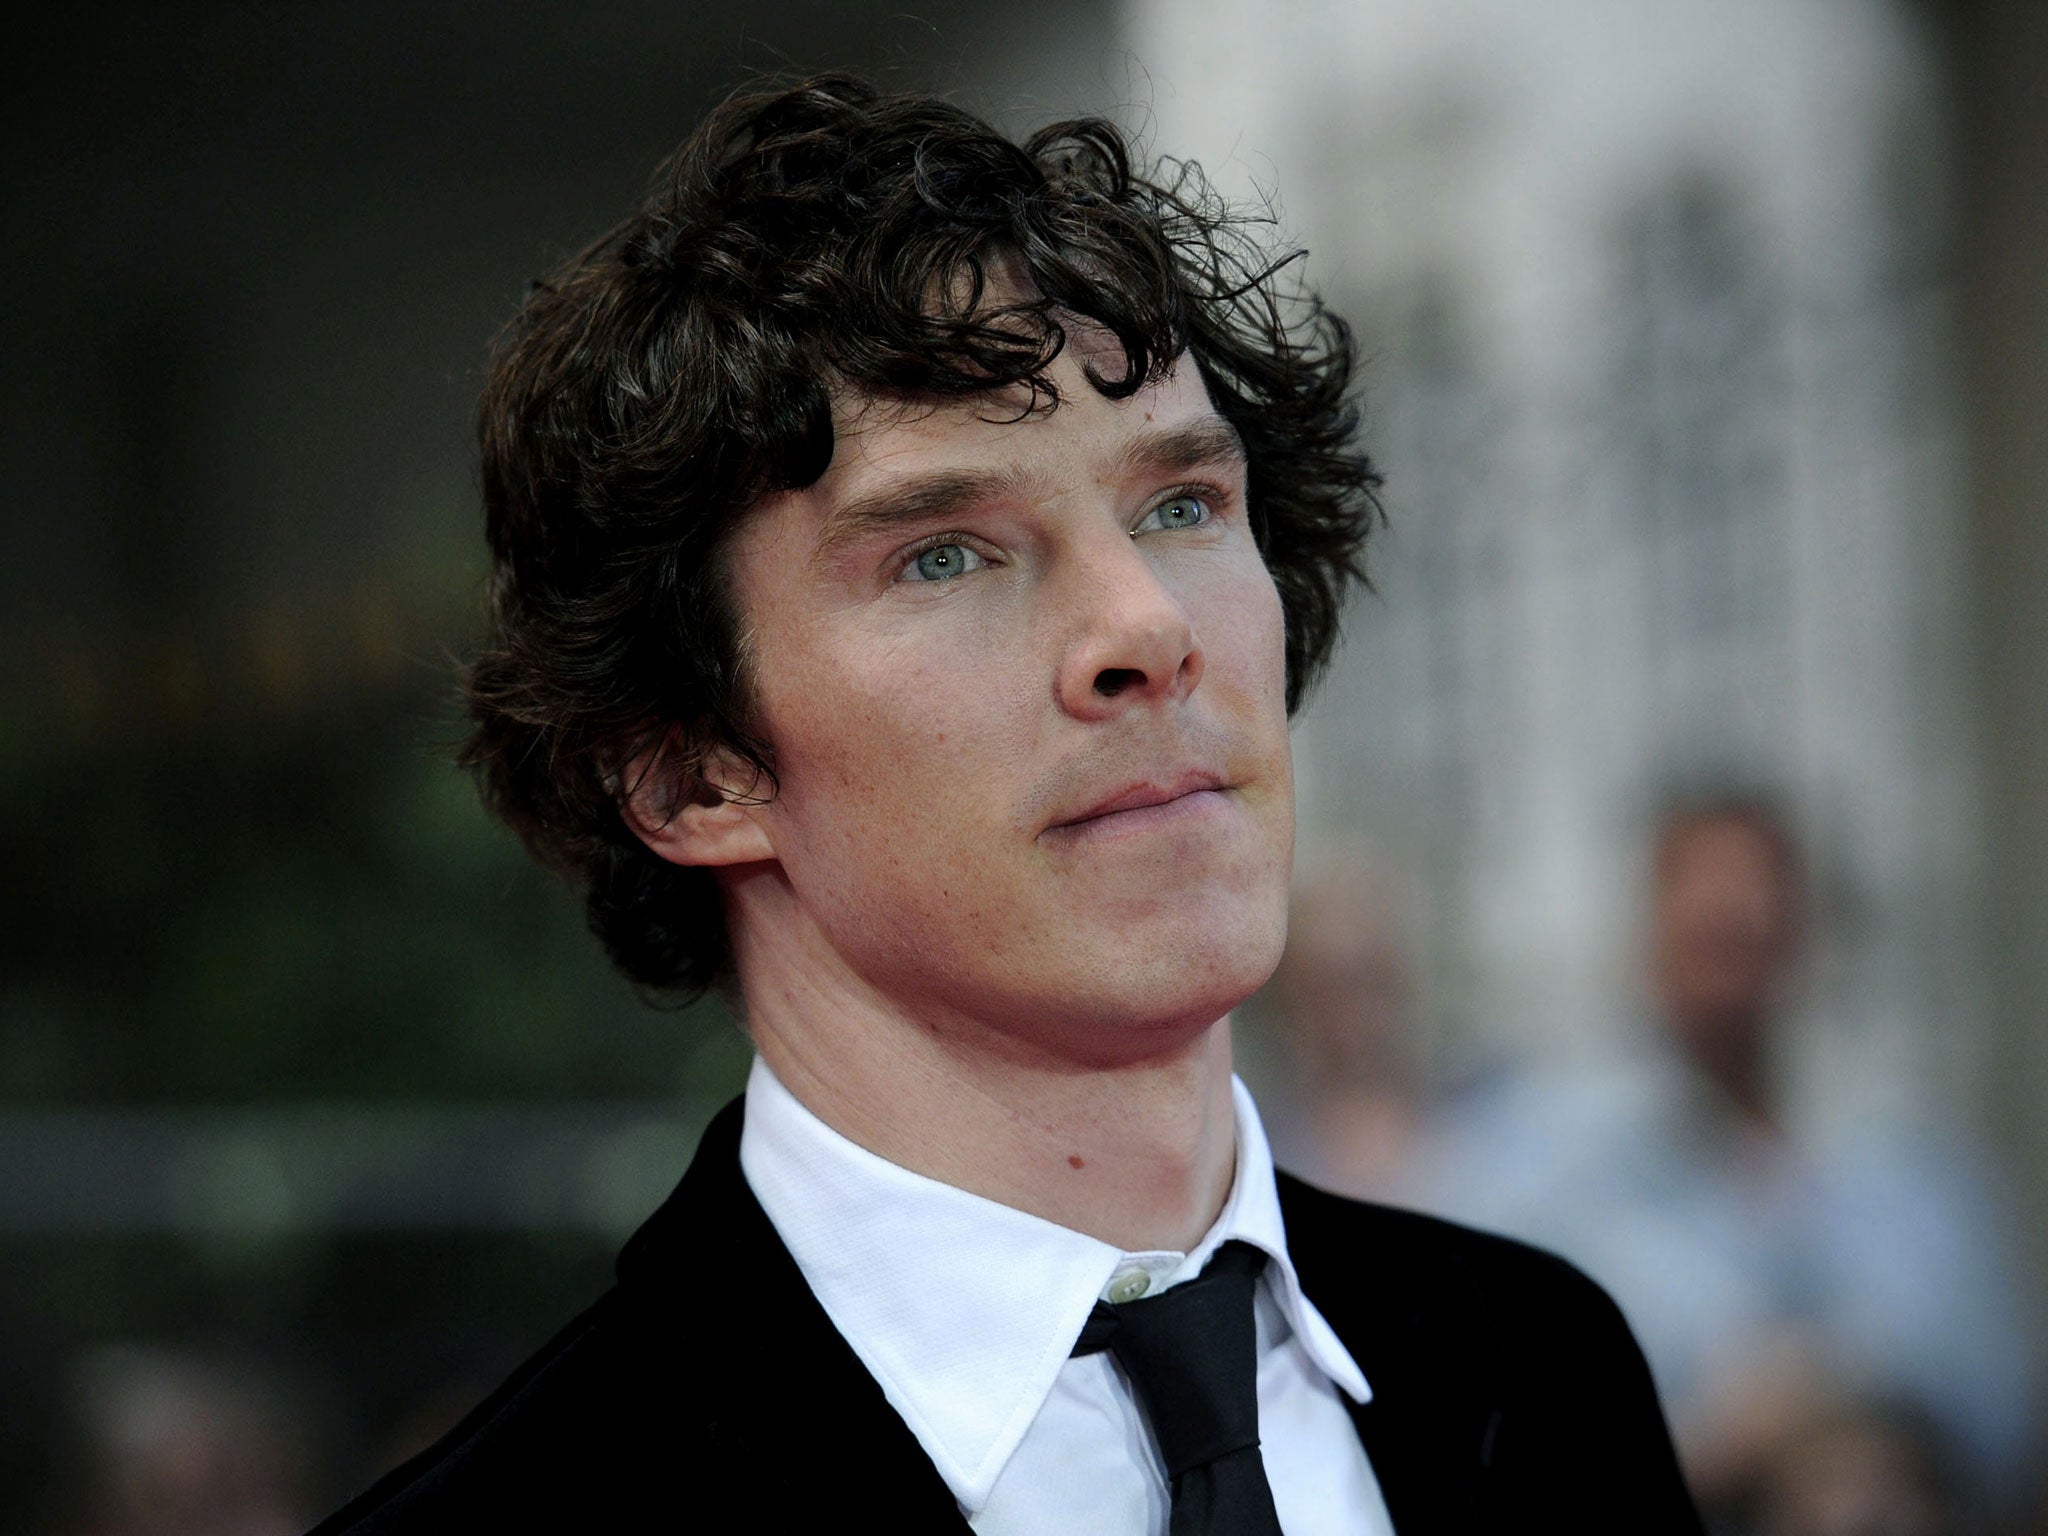 Sherlock fans almost lost out on Benedict Cumberbatch who thought the role sounded too "cheap" at first